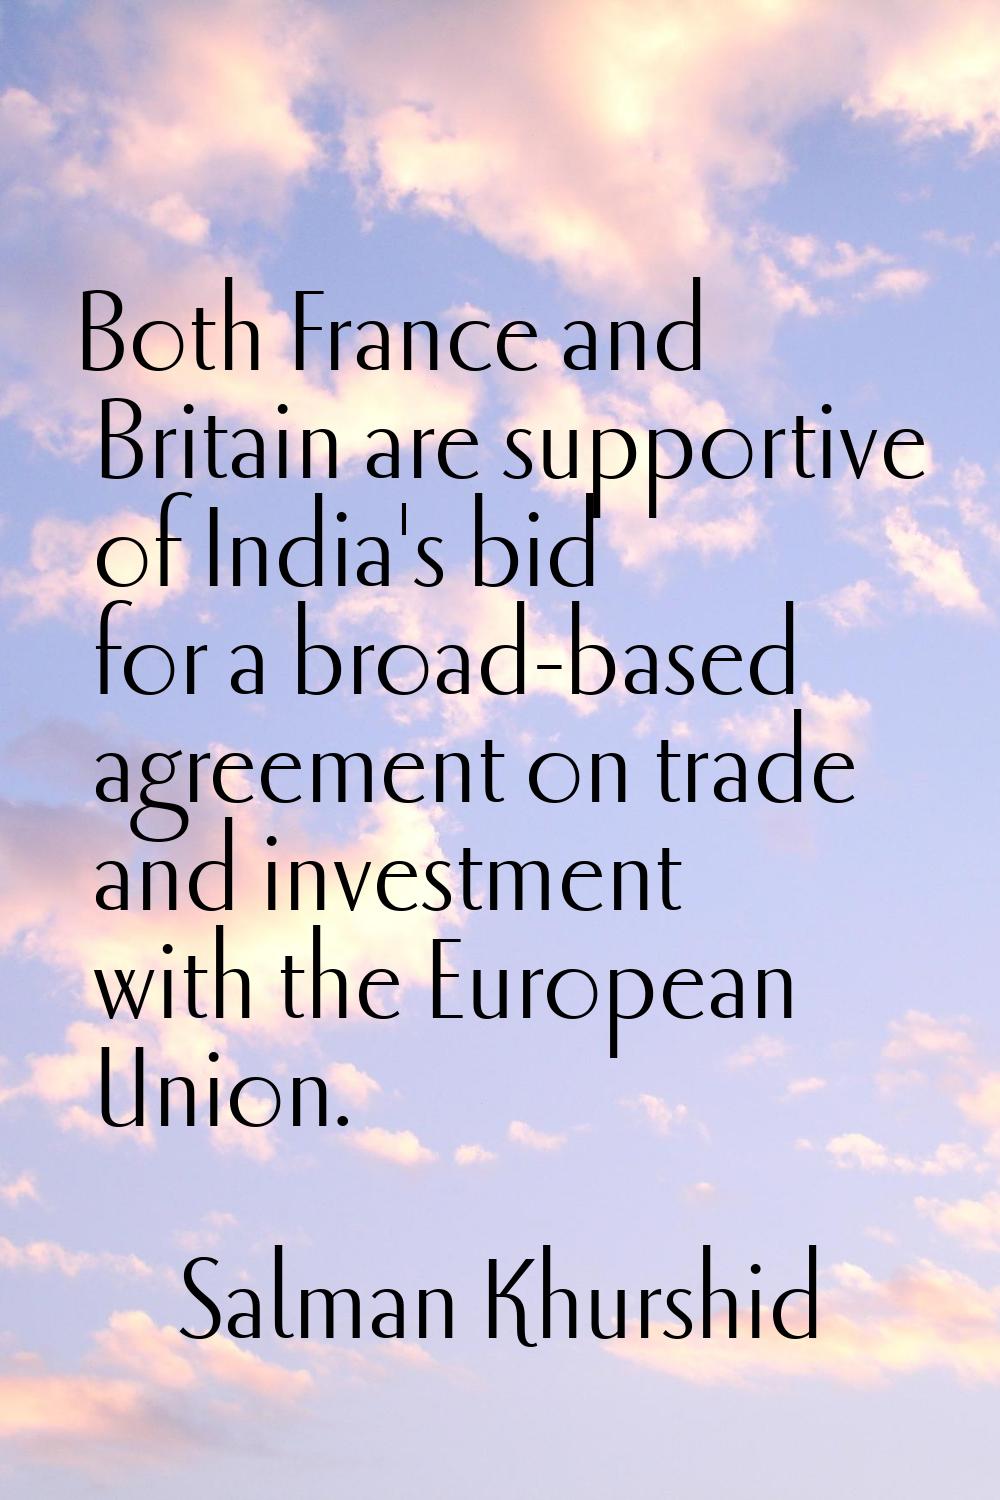 Both France and Britain are supportive of India's bid for a broad-based agreement on trade and inve